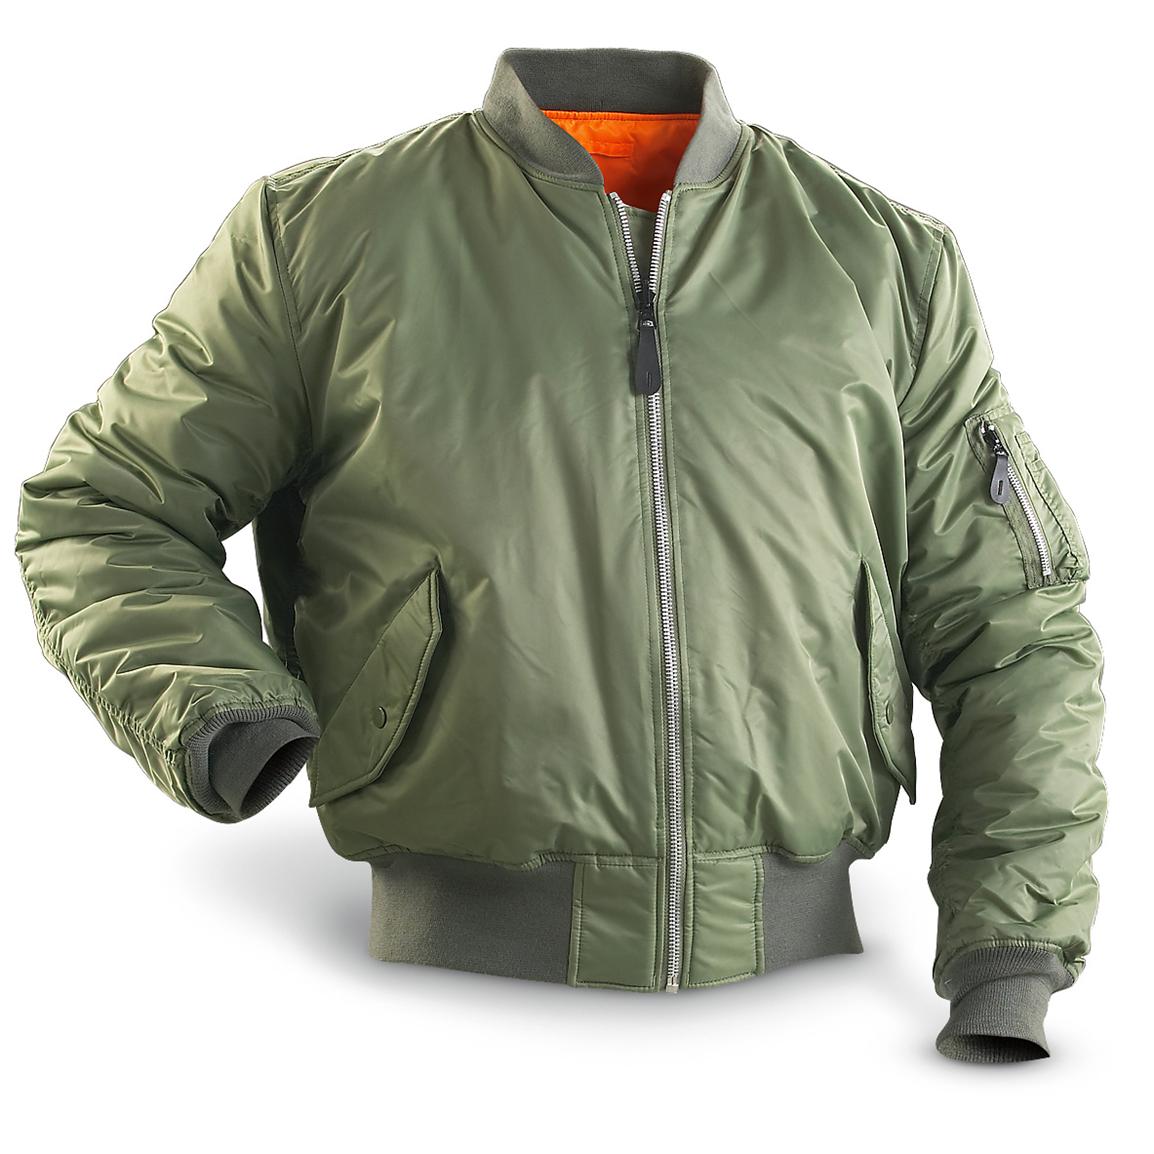 Knox Armory® MA - 1 Jacket - 144452, Tactical Clothing at Sportsman's Guide